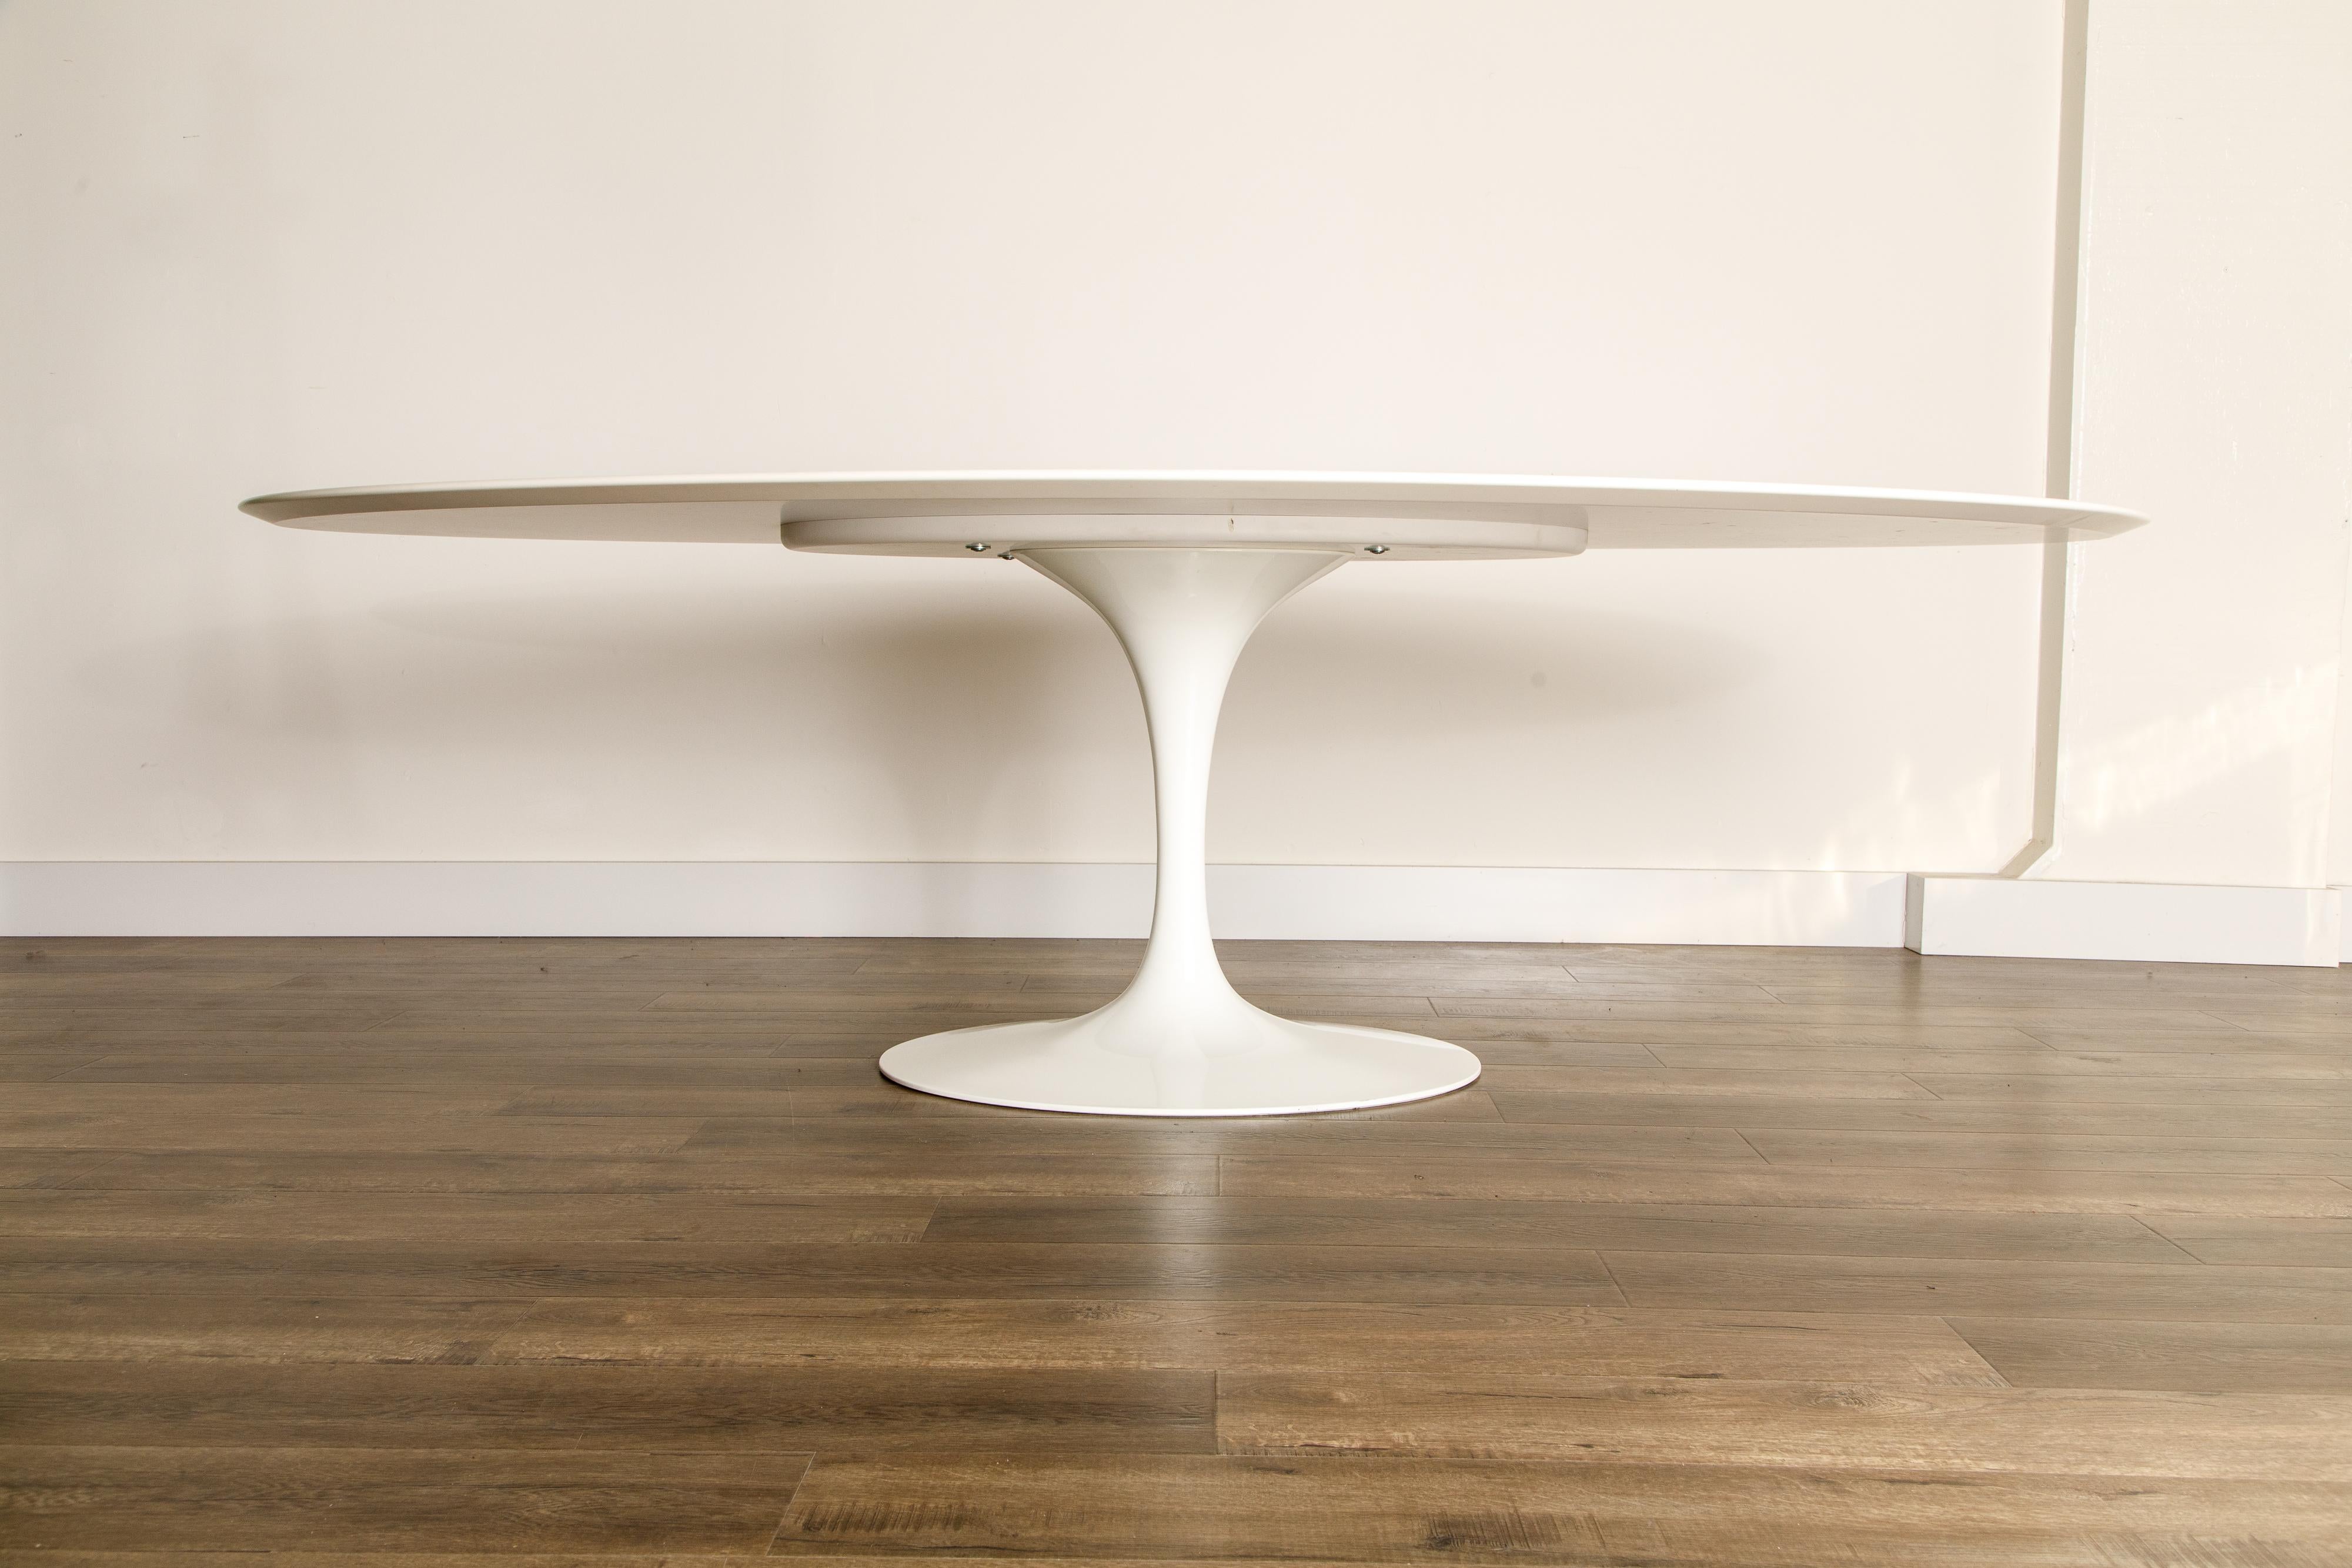 This oval Eero Saarinen for Knoll 'Tulip' pedestal dining table is the largest of the sizes they make, 96